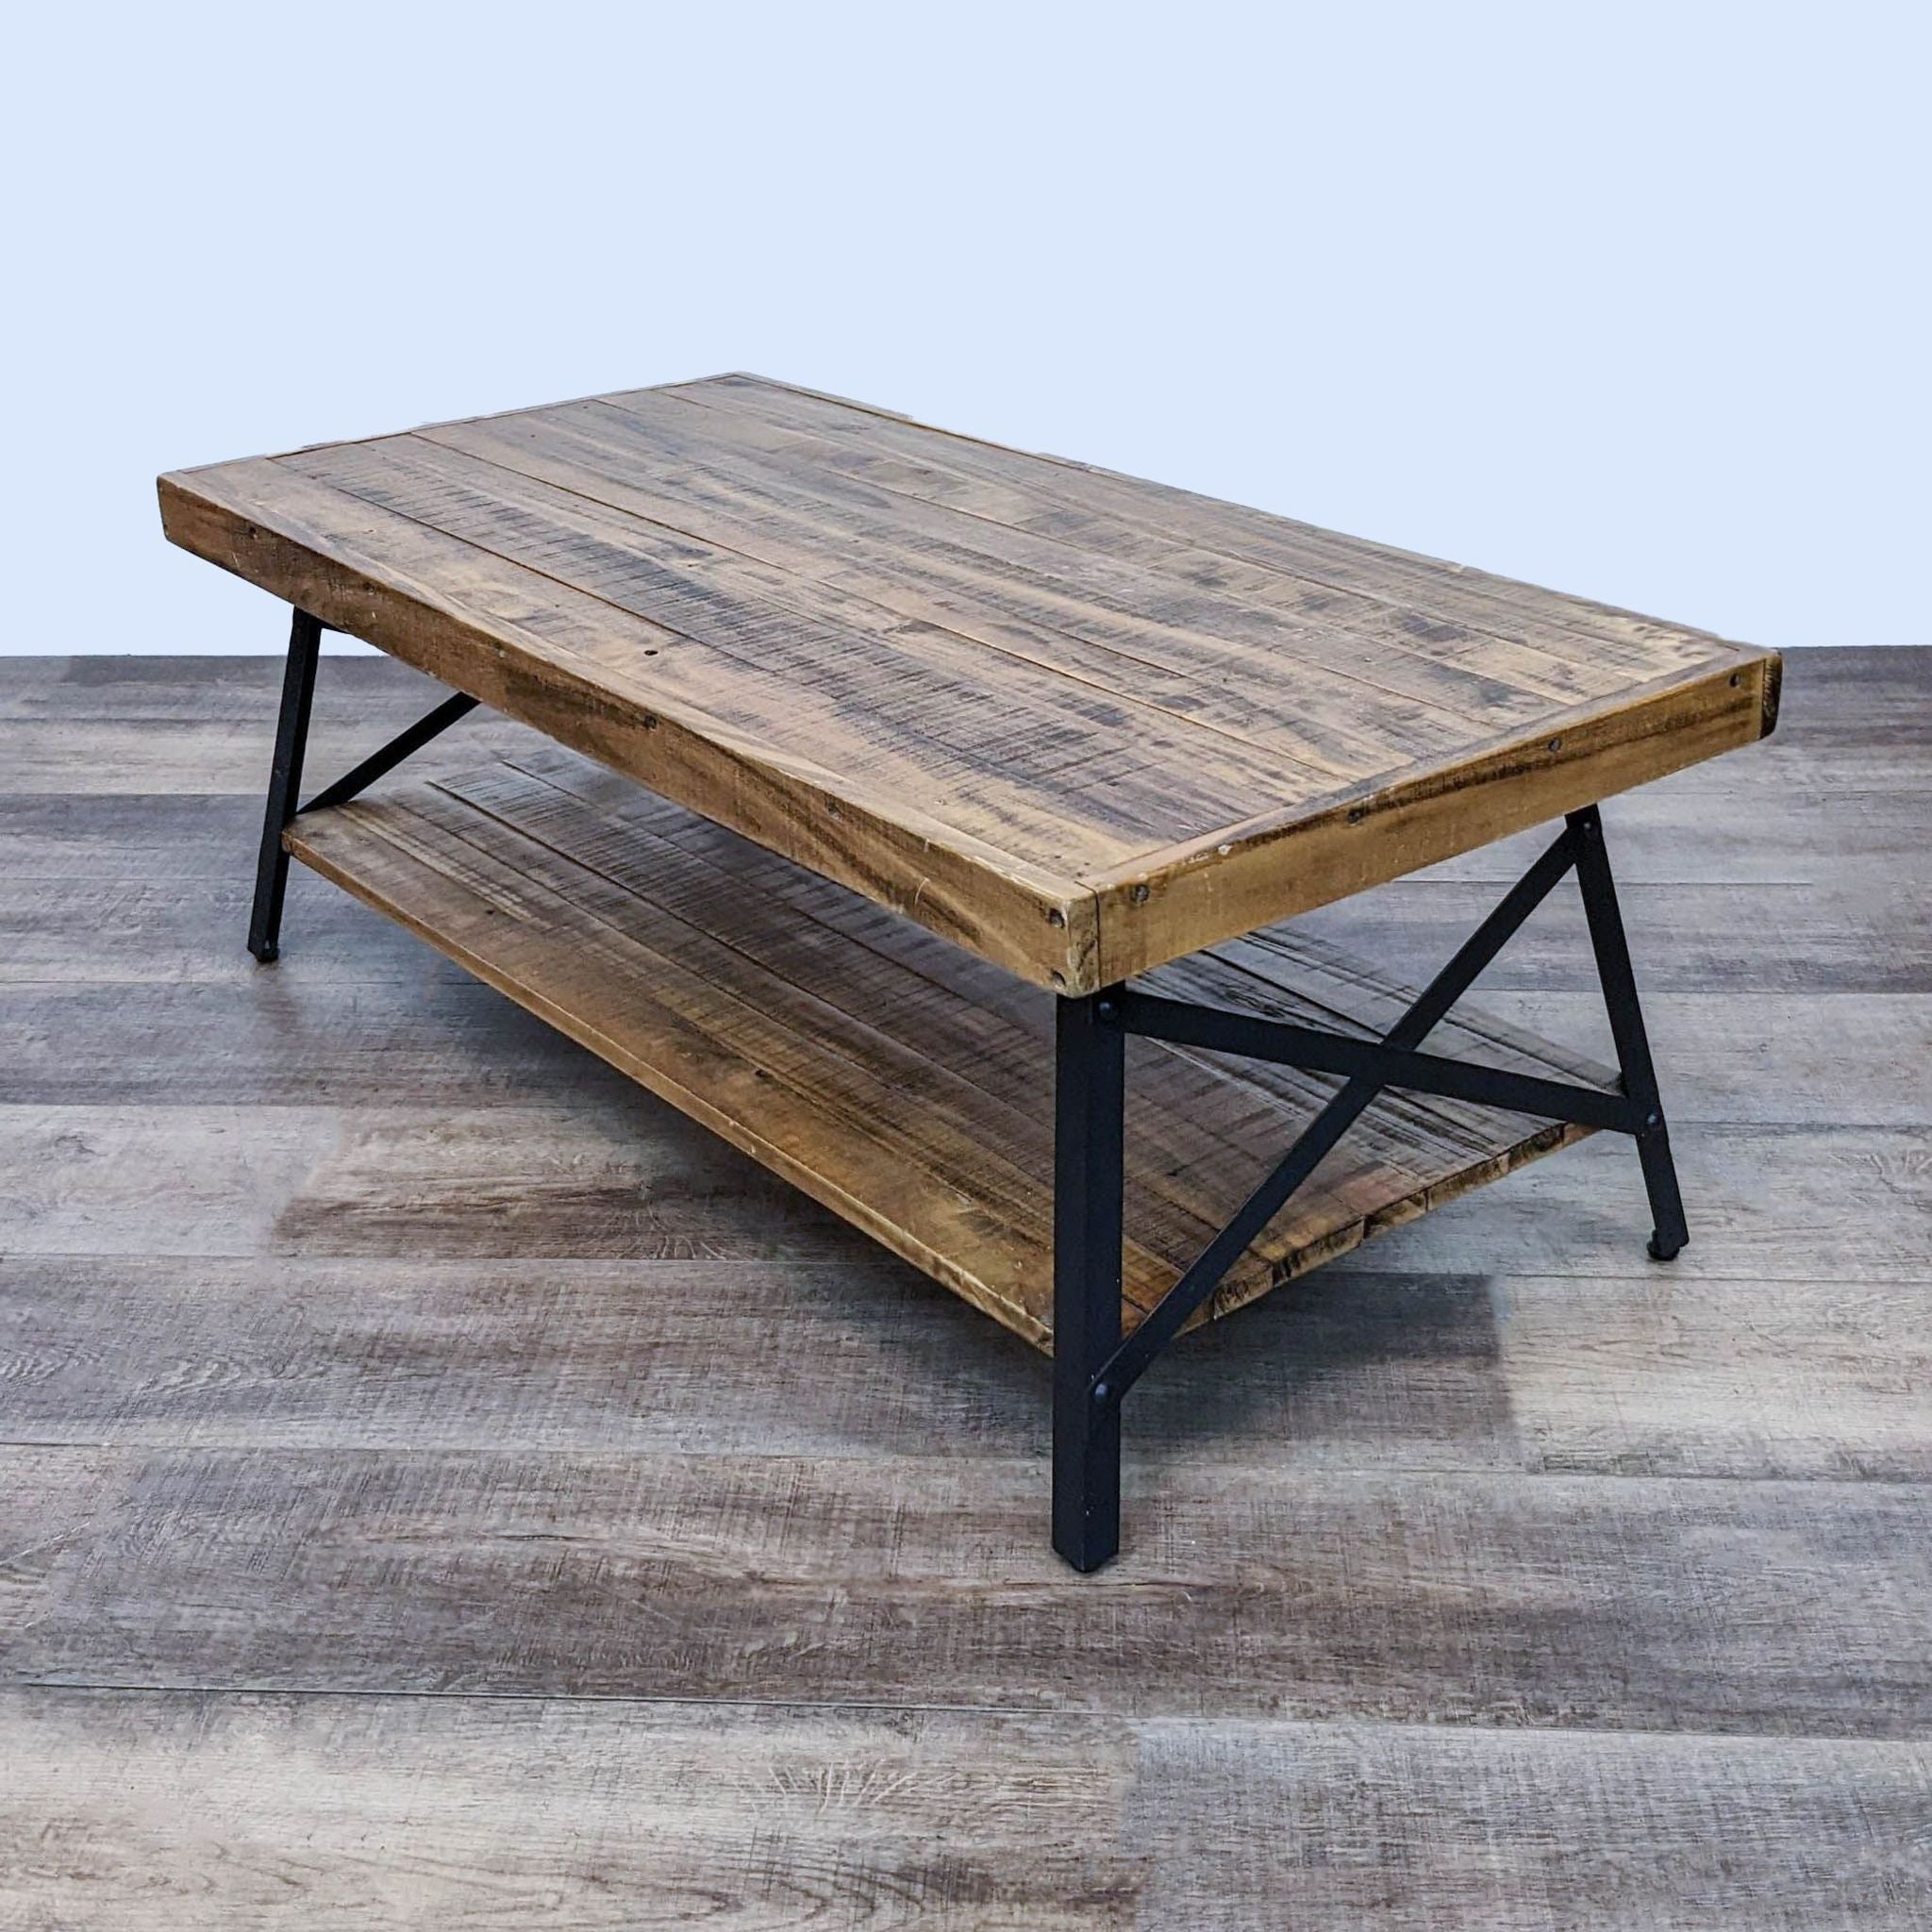 BoConcept coffee table with planked wood top and shelf, supported by black metal legs and bracings, on a wooden floor.